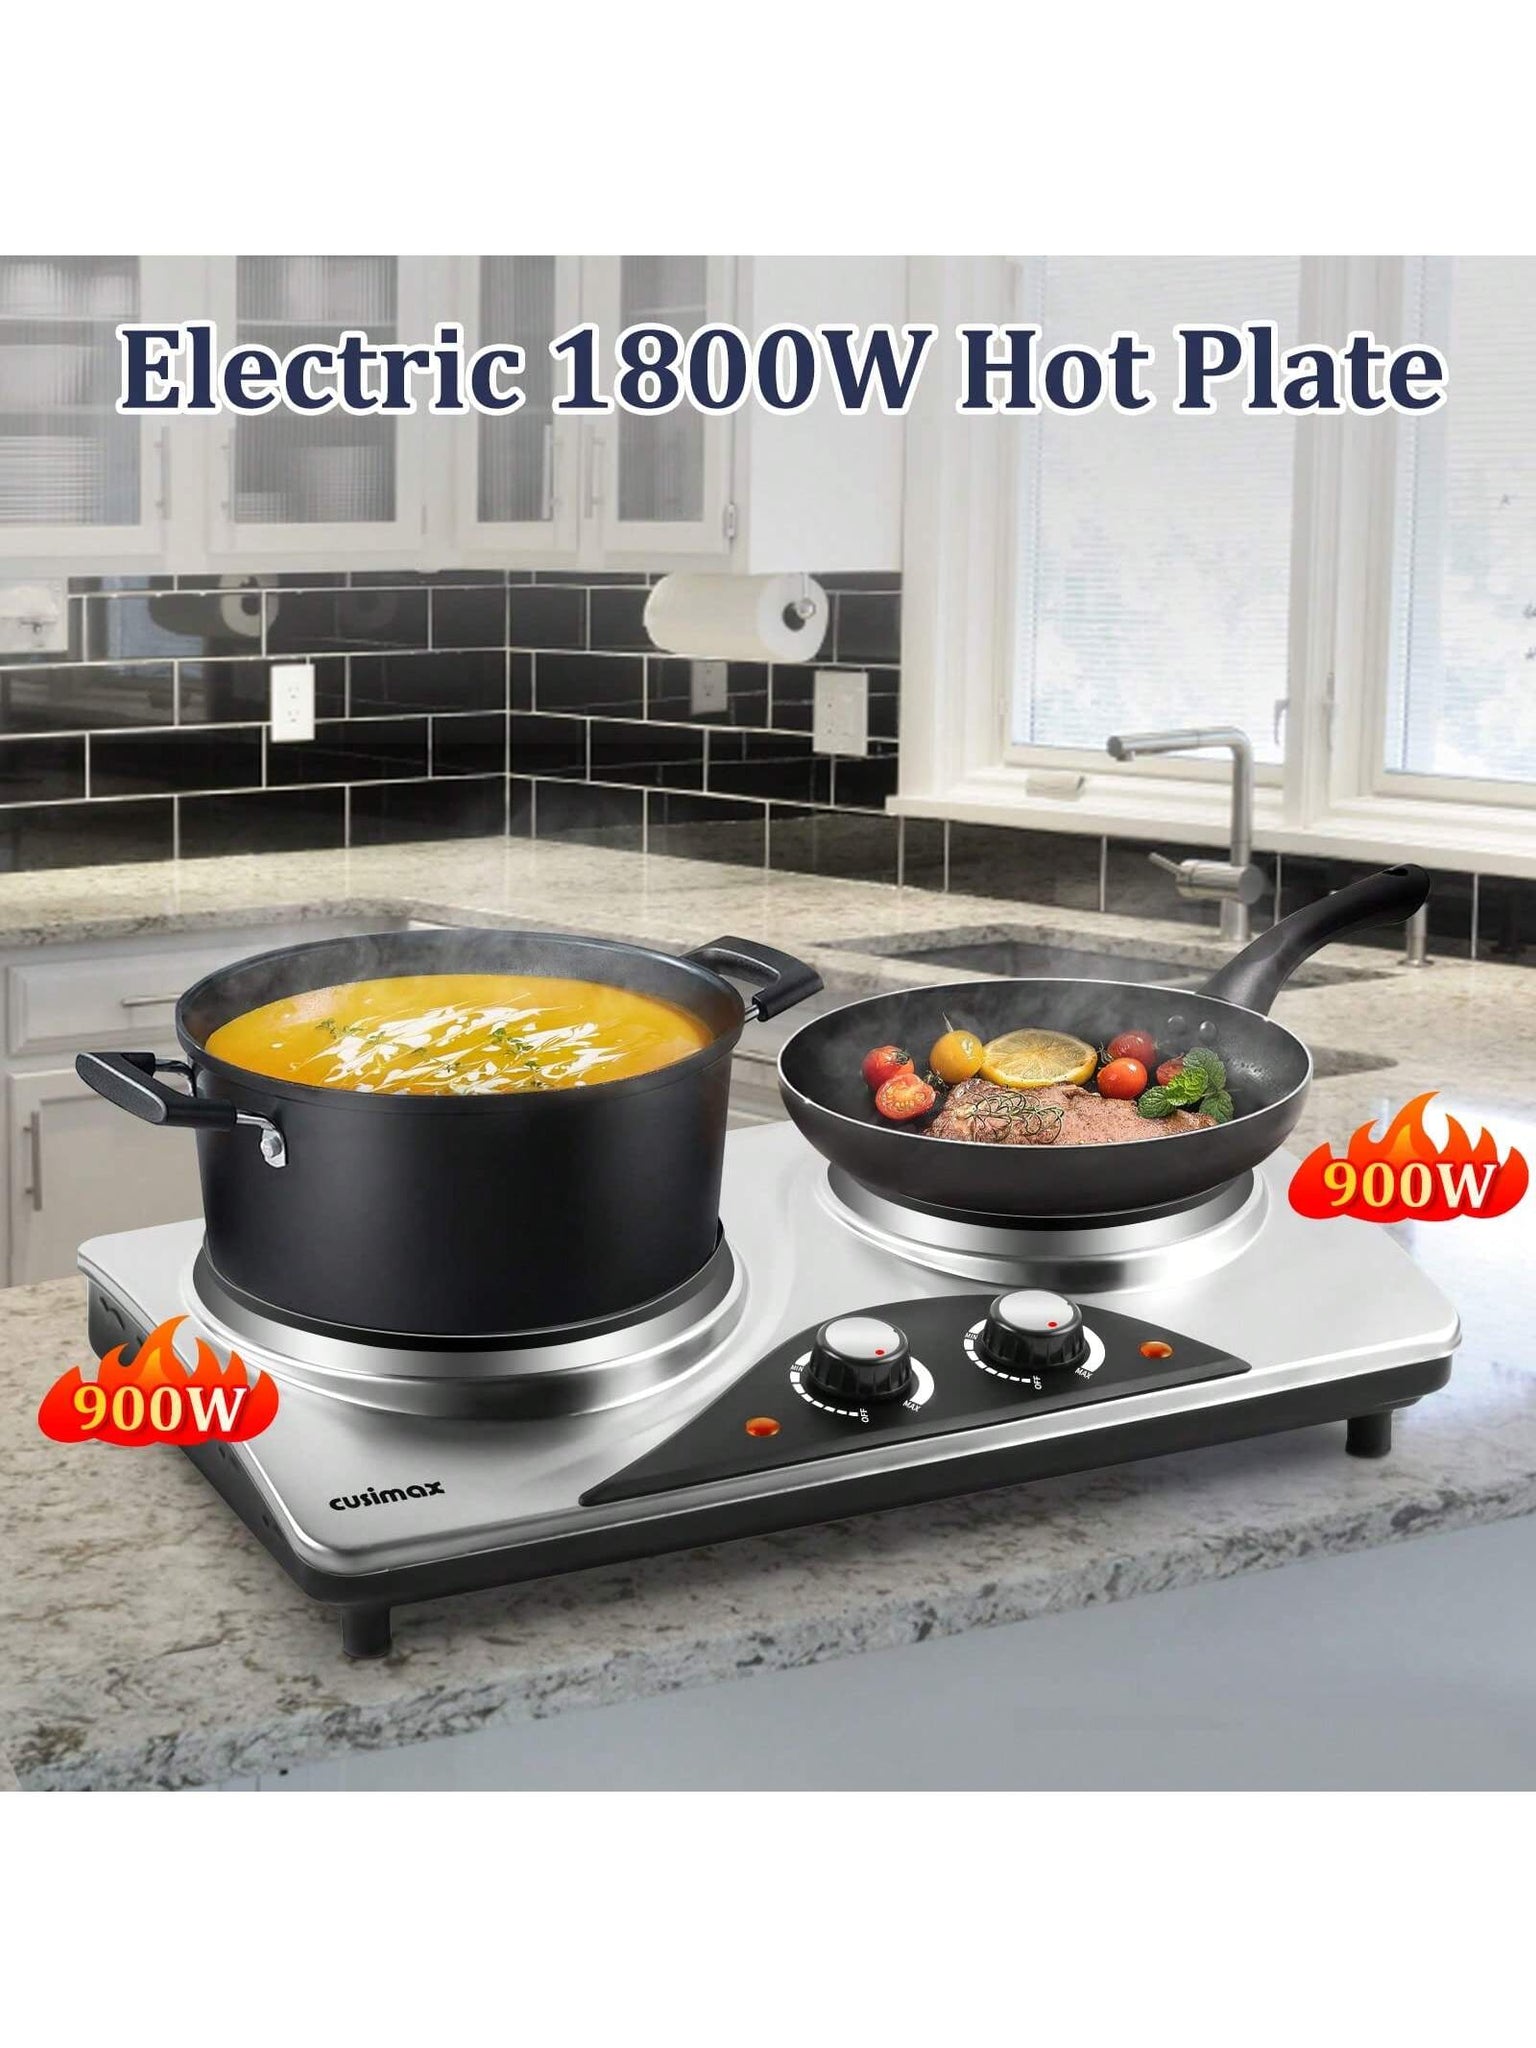 YONGSTYLE Double Hot Plate Electric Ceramic plate,1800W Infrared Cooktop  7inches 2 Burners for ALL Cookwares for Home/RV/Campsilver,900W+900W Double  Hot Plate